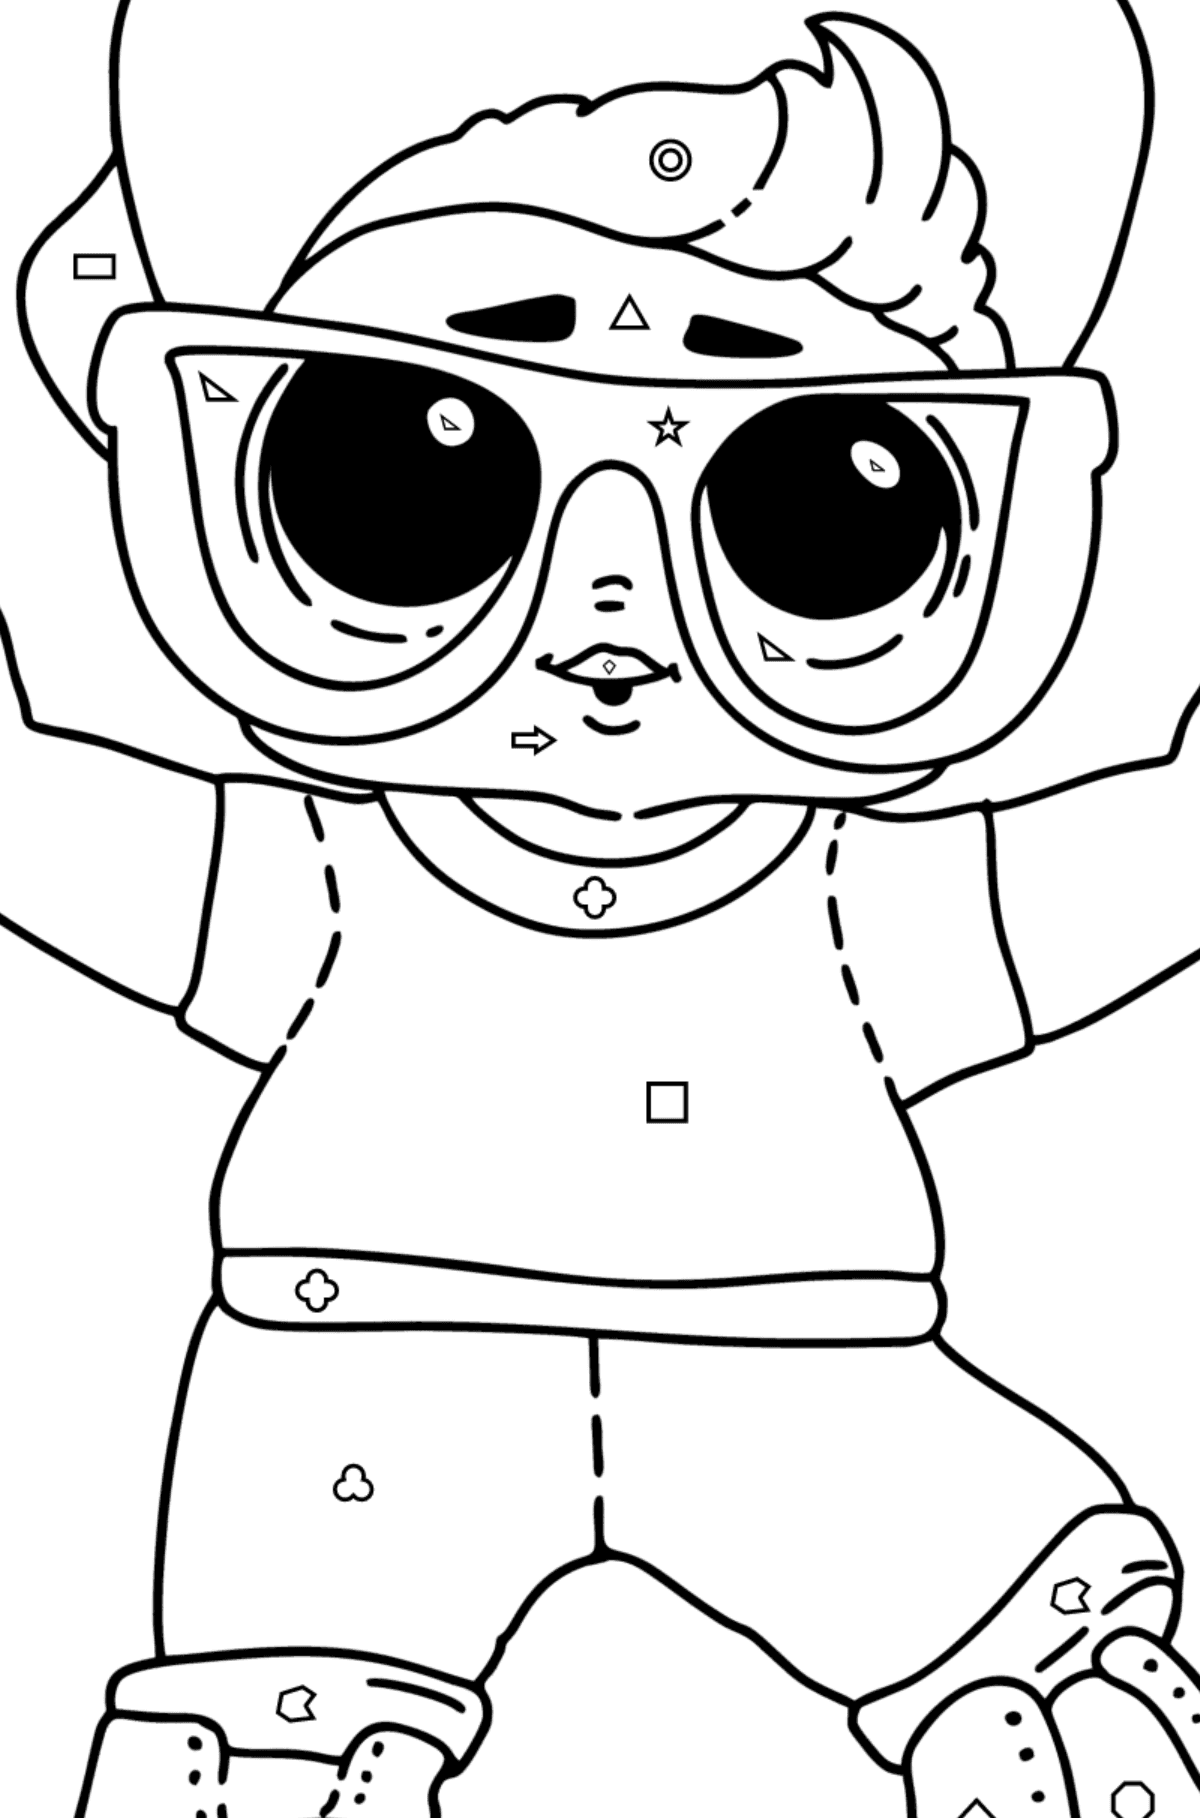 Coloring page LOL boy Next Door ♥ Online and Print for Free